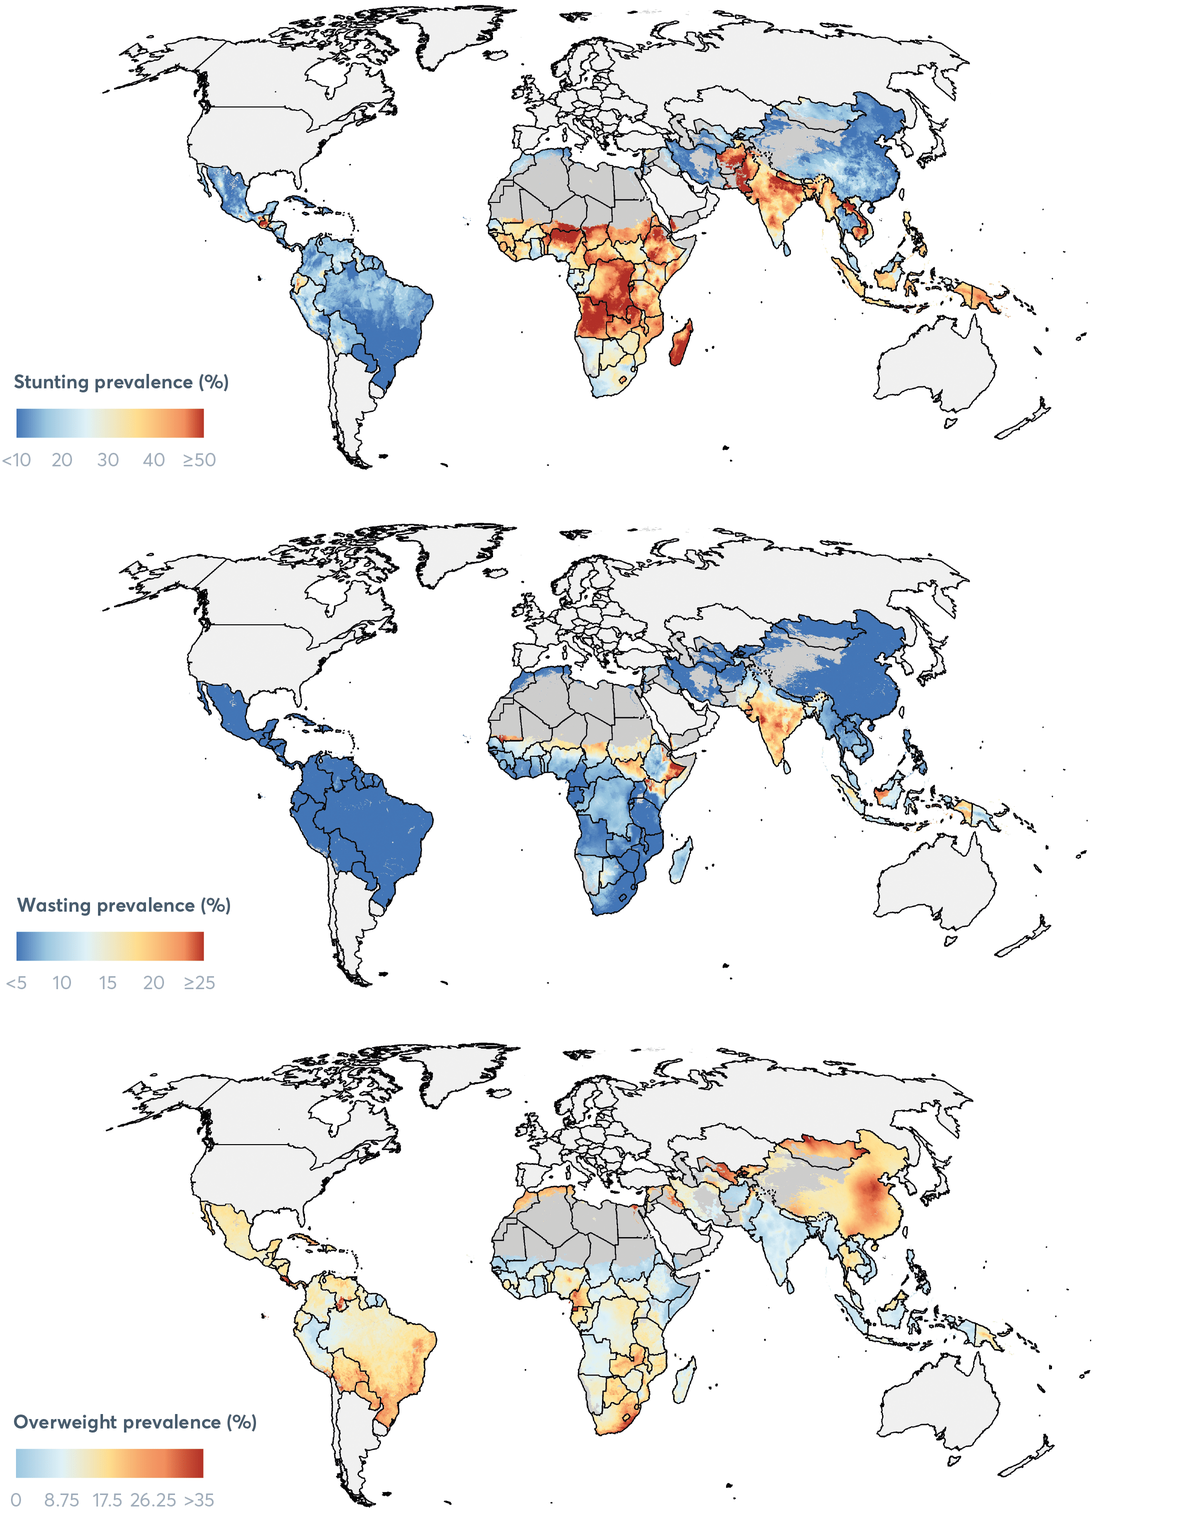 FIGURE 2.9 Prevalence of stunting, wasting and overweight among children under 5 at the 5 × 5-km grid cell-level, 2017